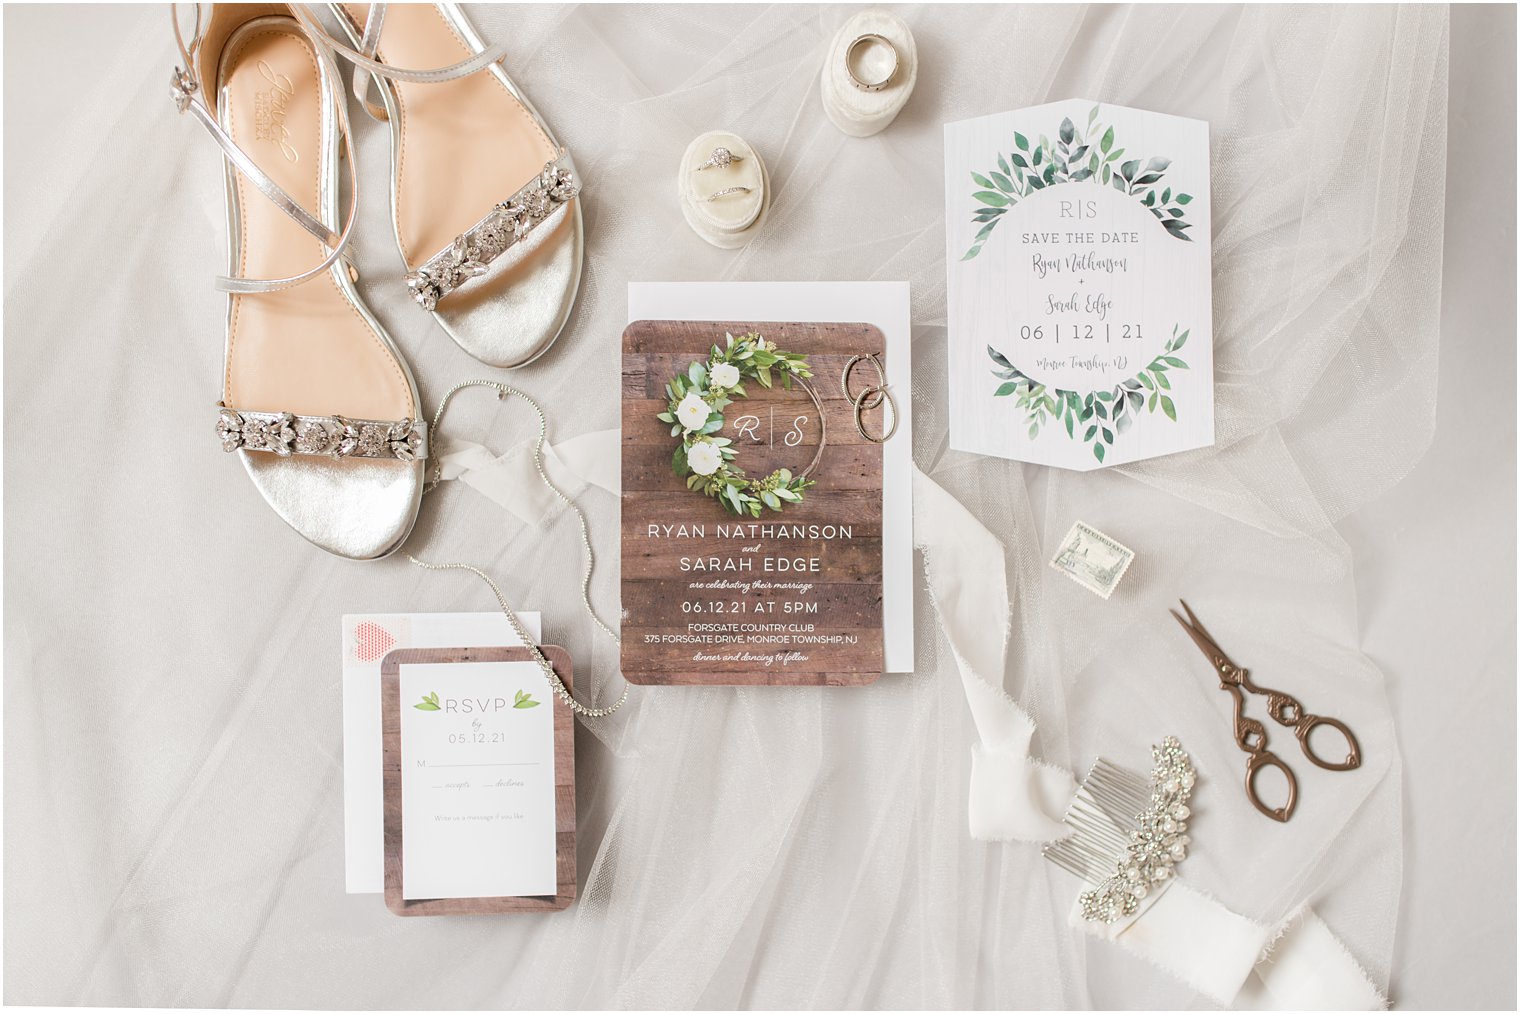 flatly of summer wedding day details including shoes, rings and invitation suite 